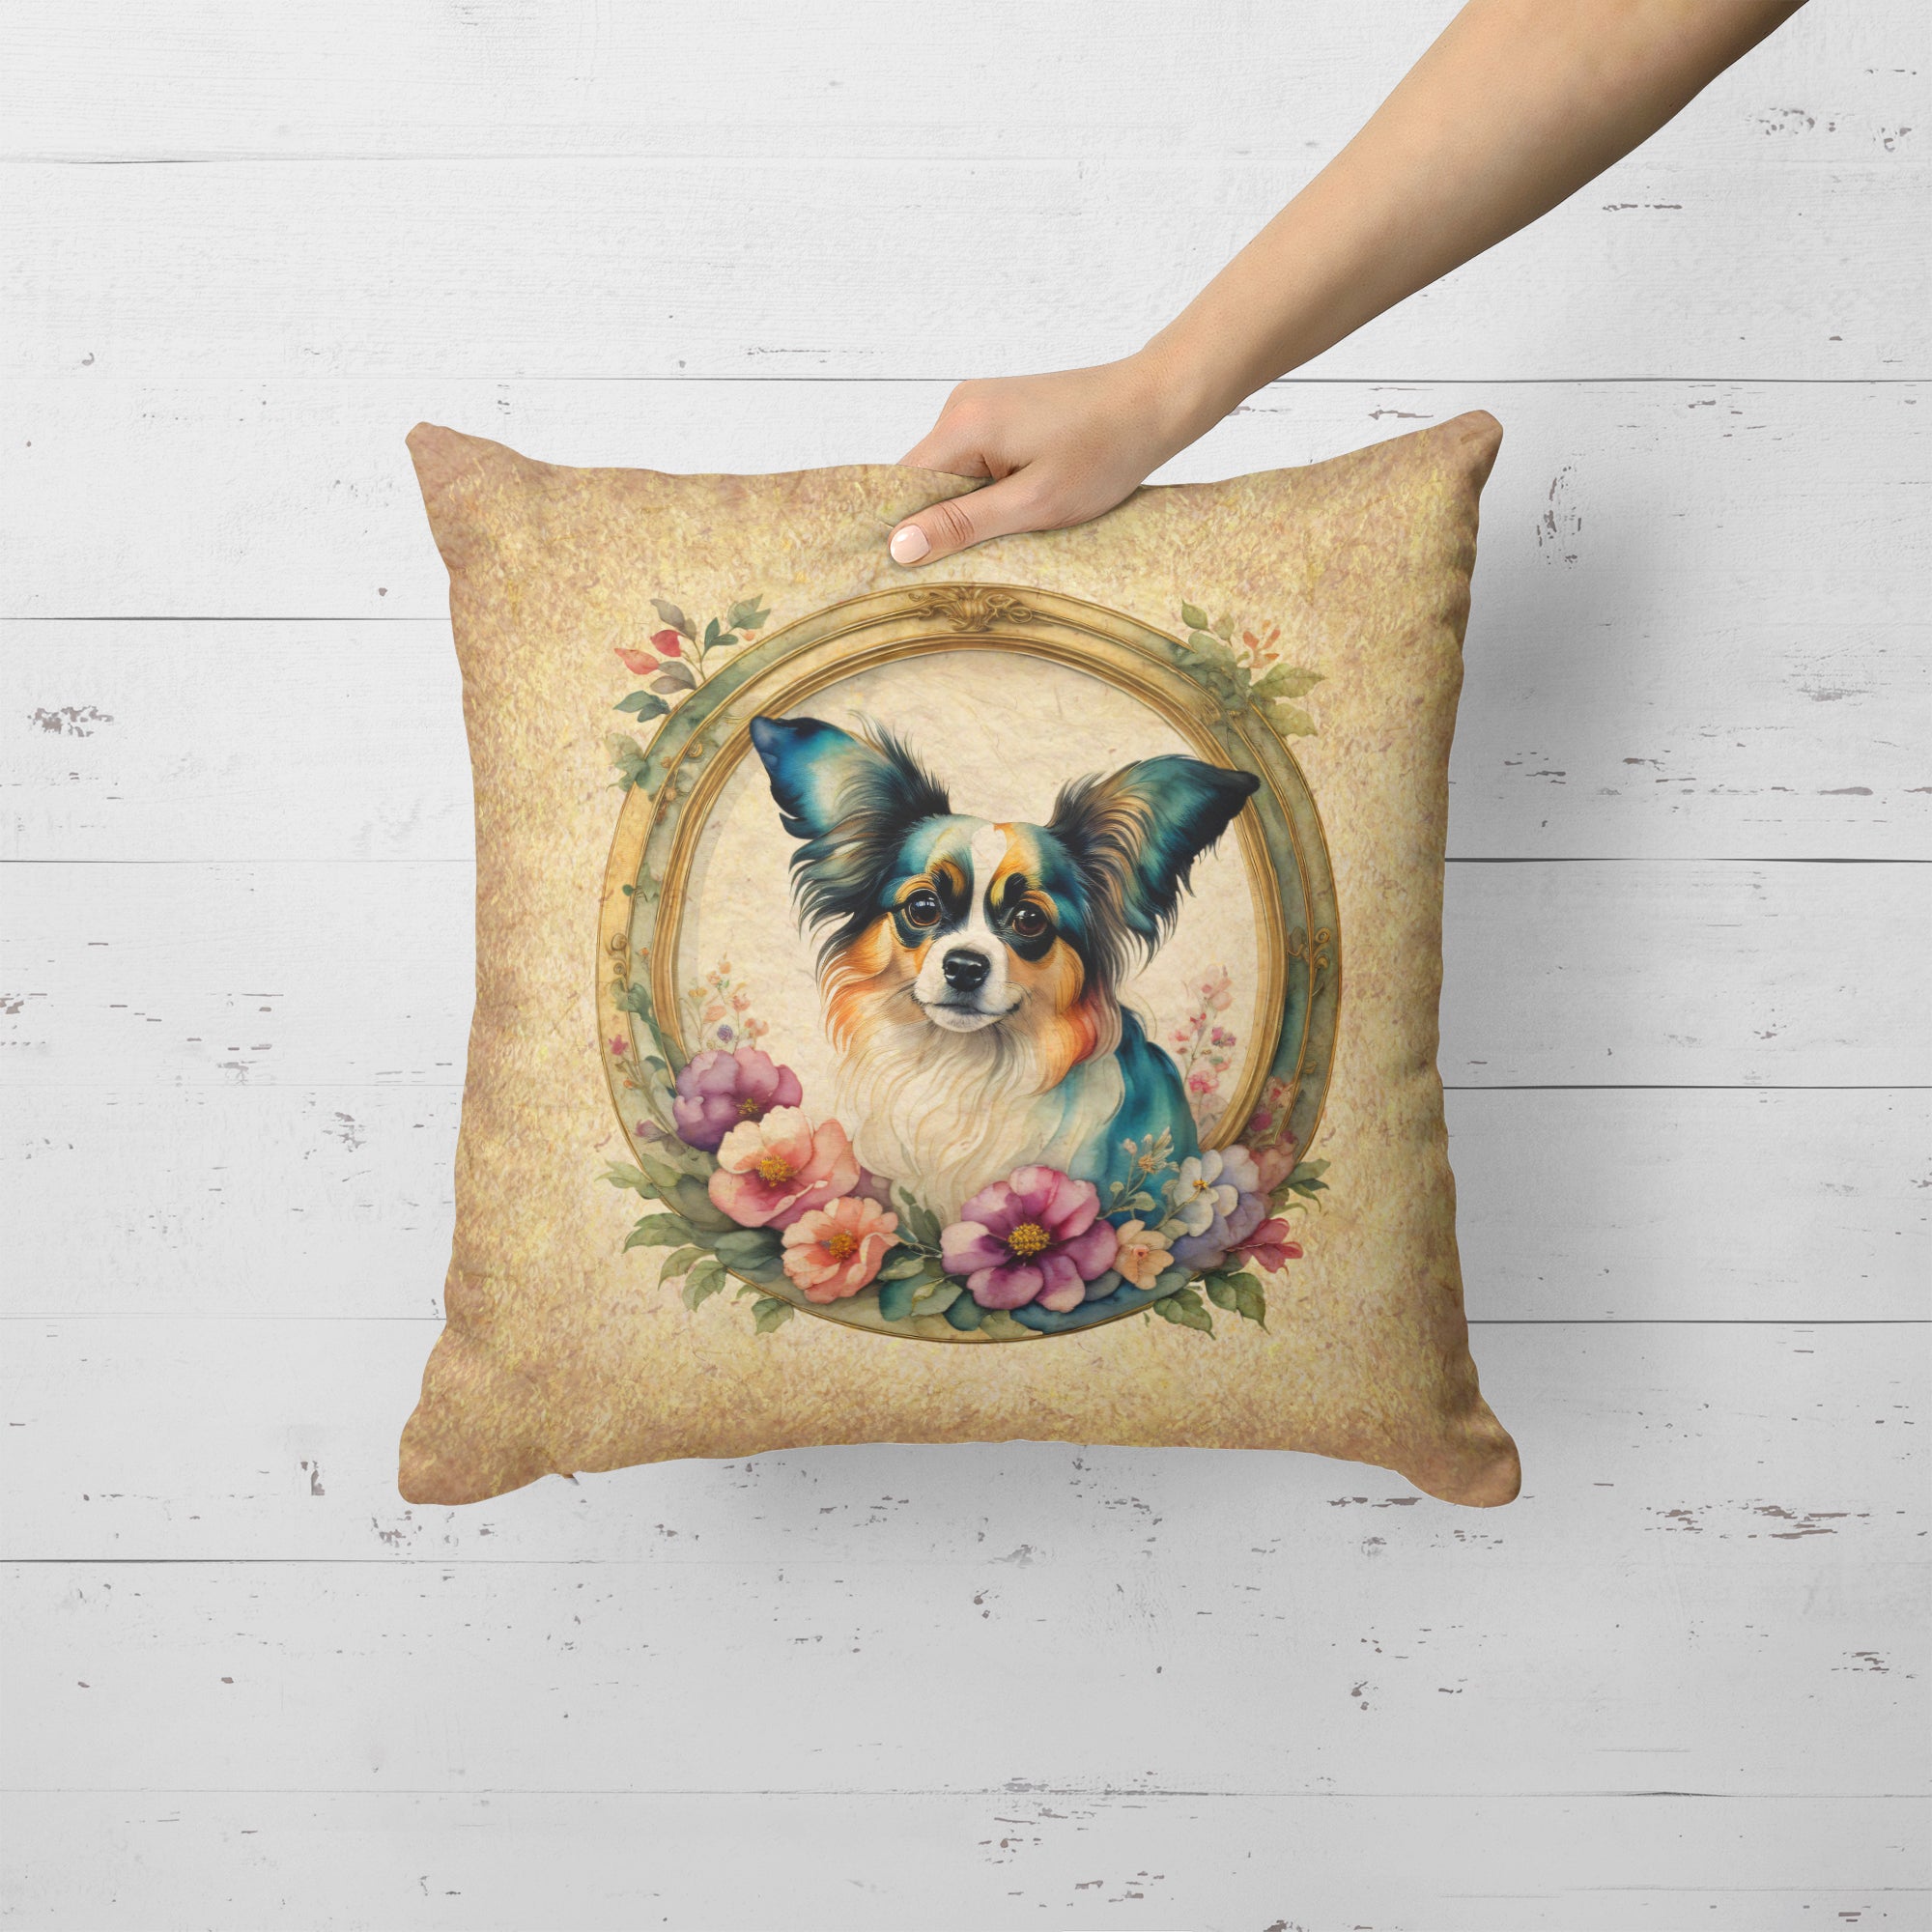 Buy this Papillon and Flowers Fabric Decorative Pillow